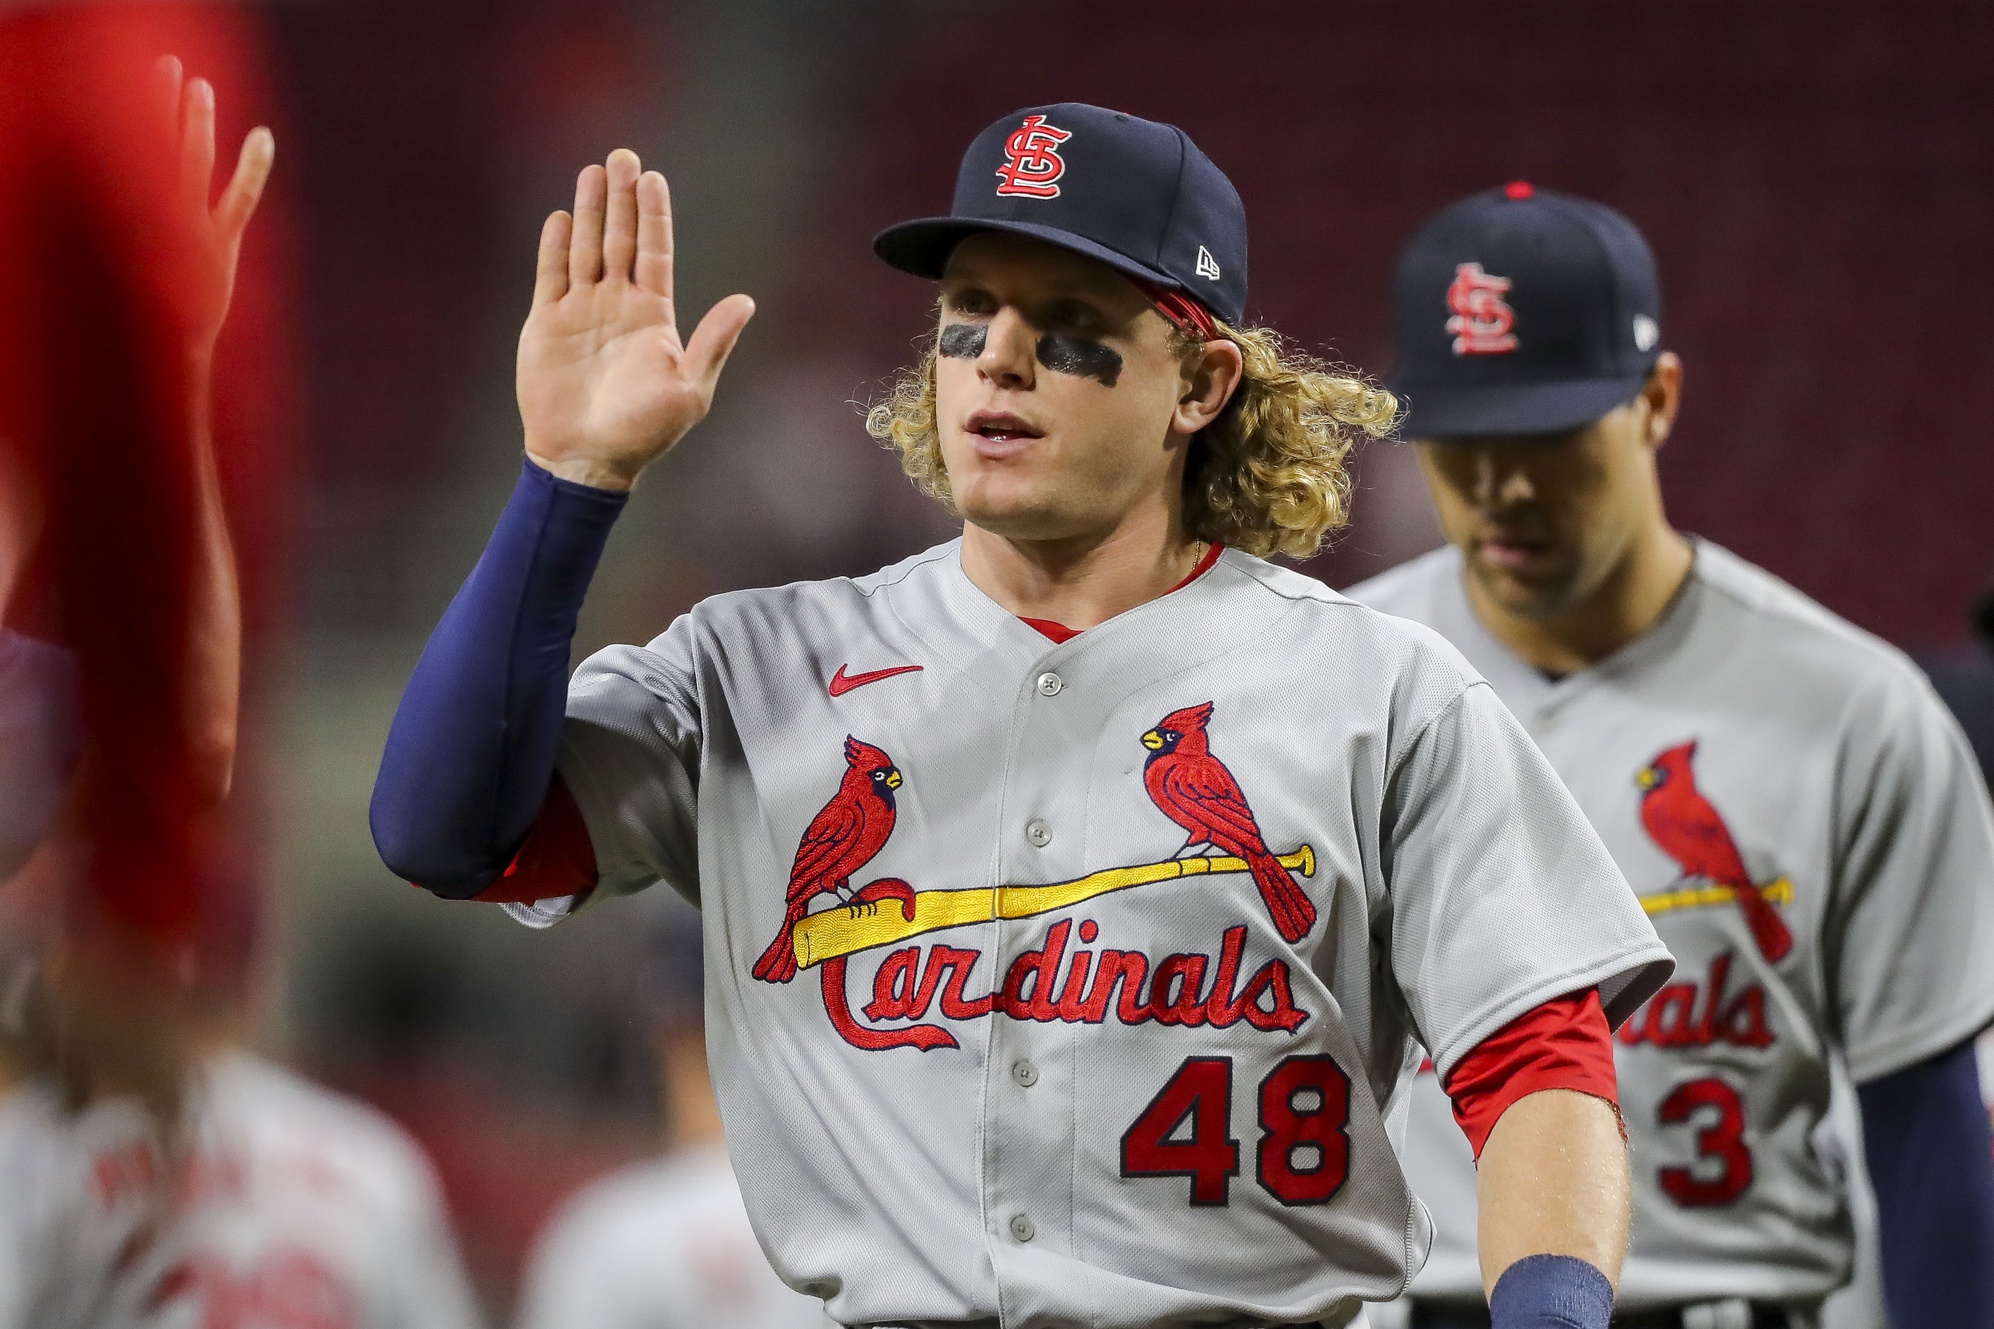 Harrison Bader making his first Yankees appearance Tuesday. : r/Cardinals